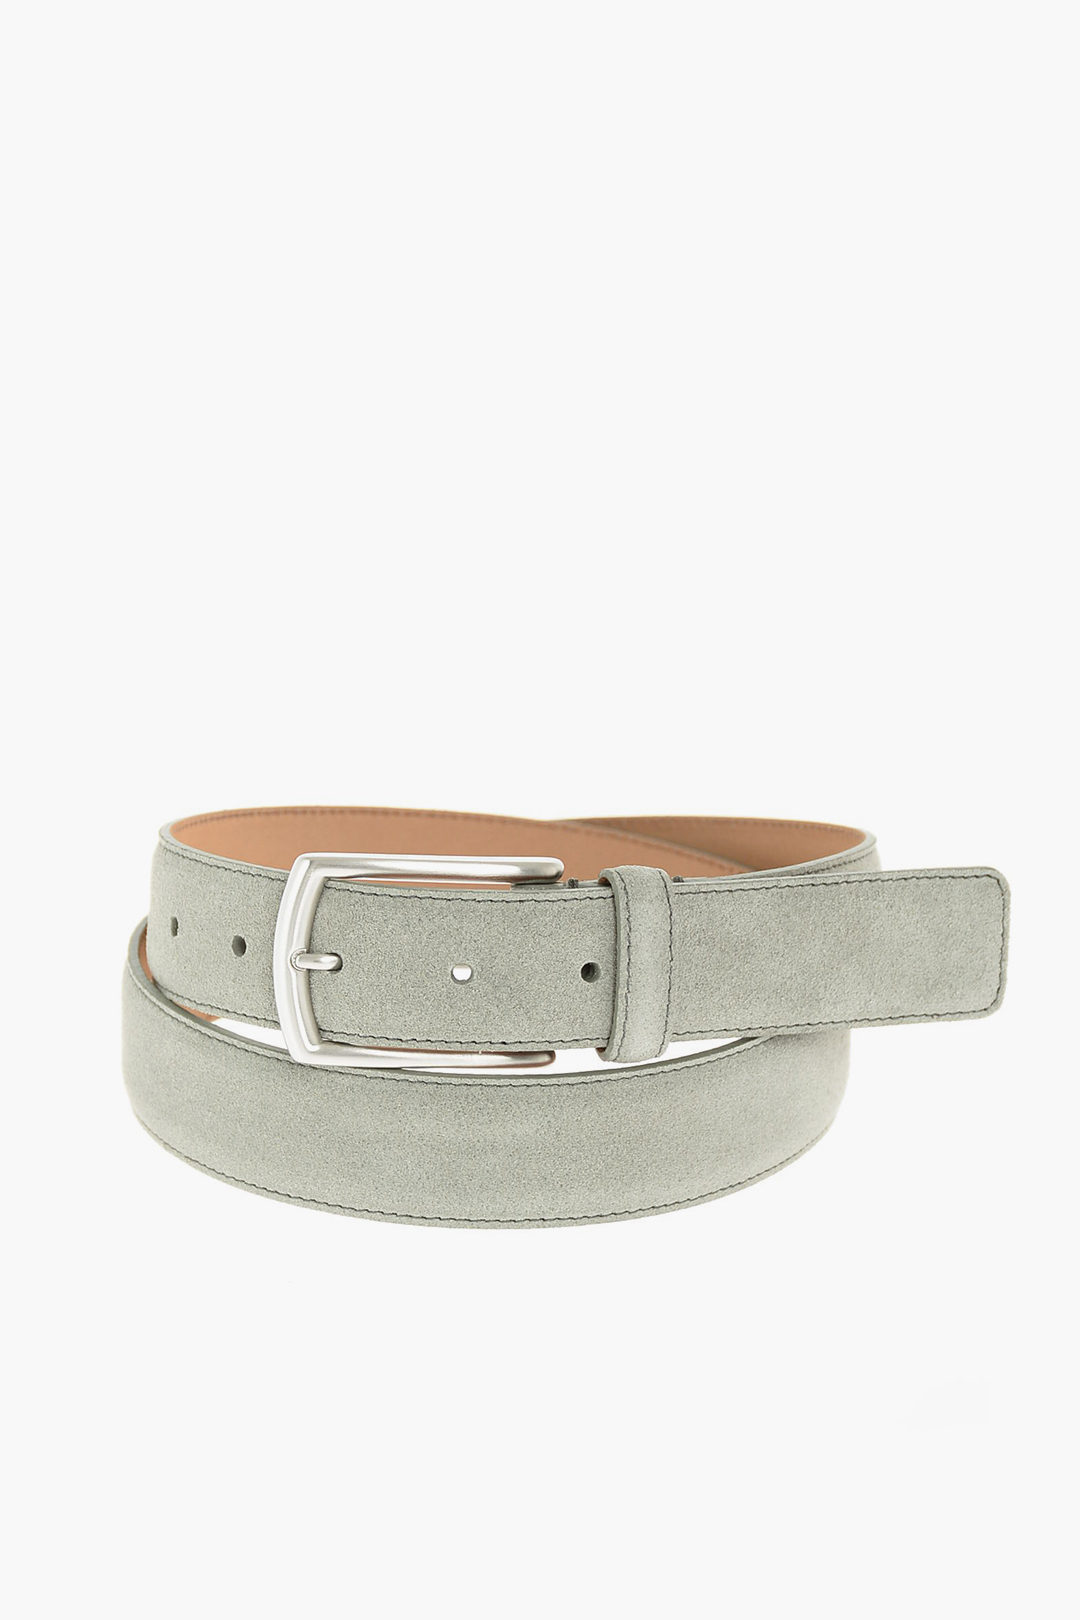 ZZEGNA LUXURY 30mm suede leather belt